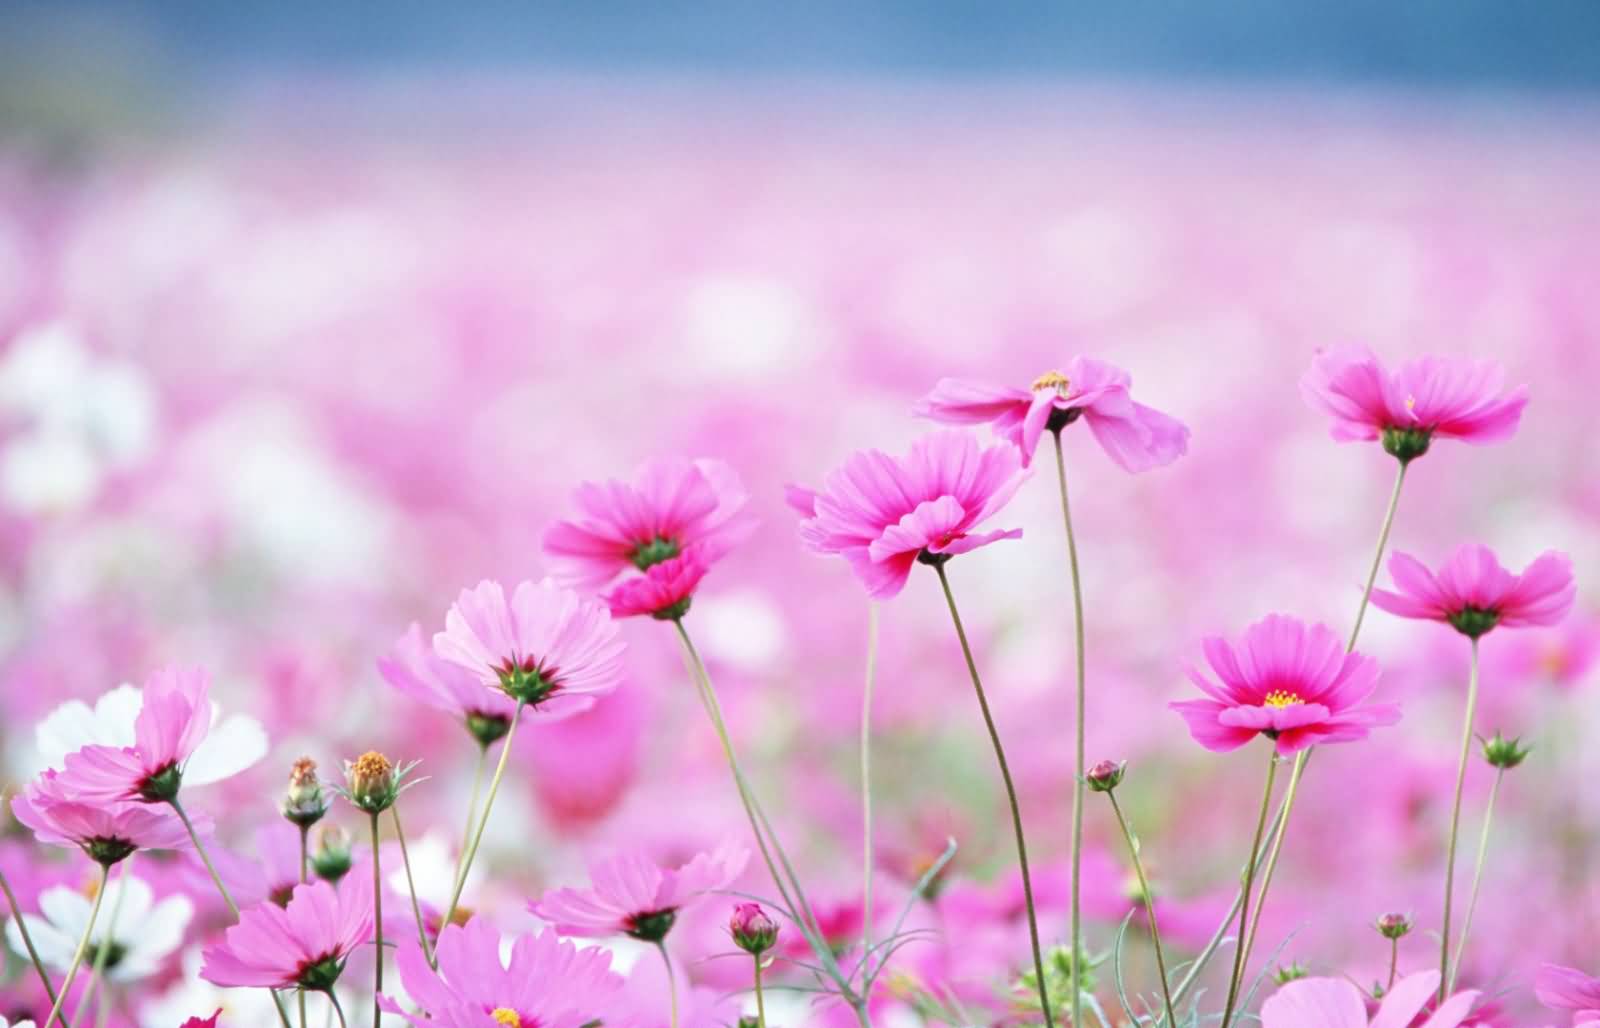 Pink And White Flowers Field